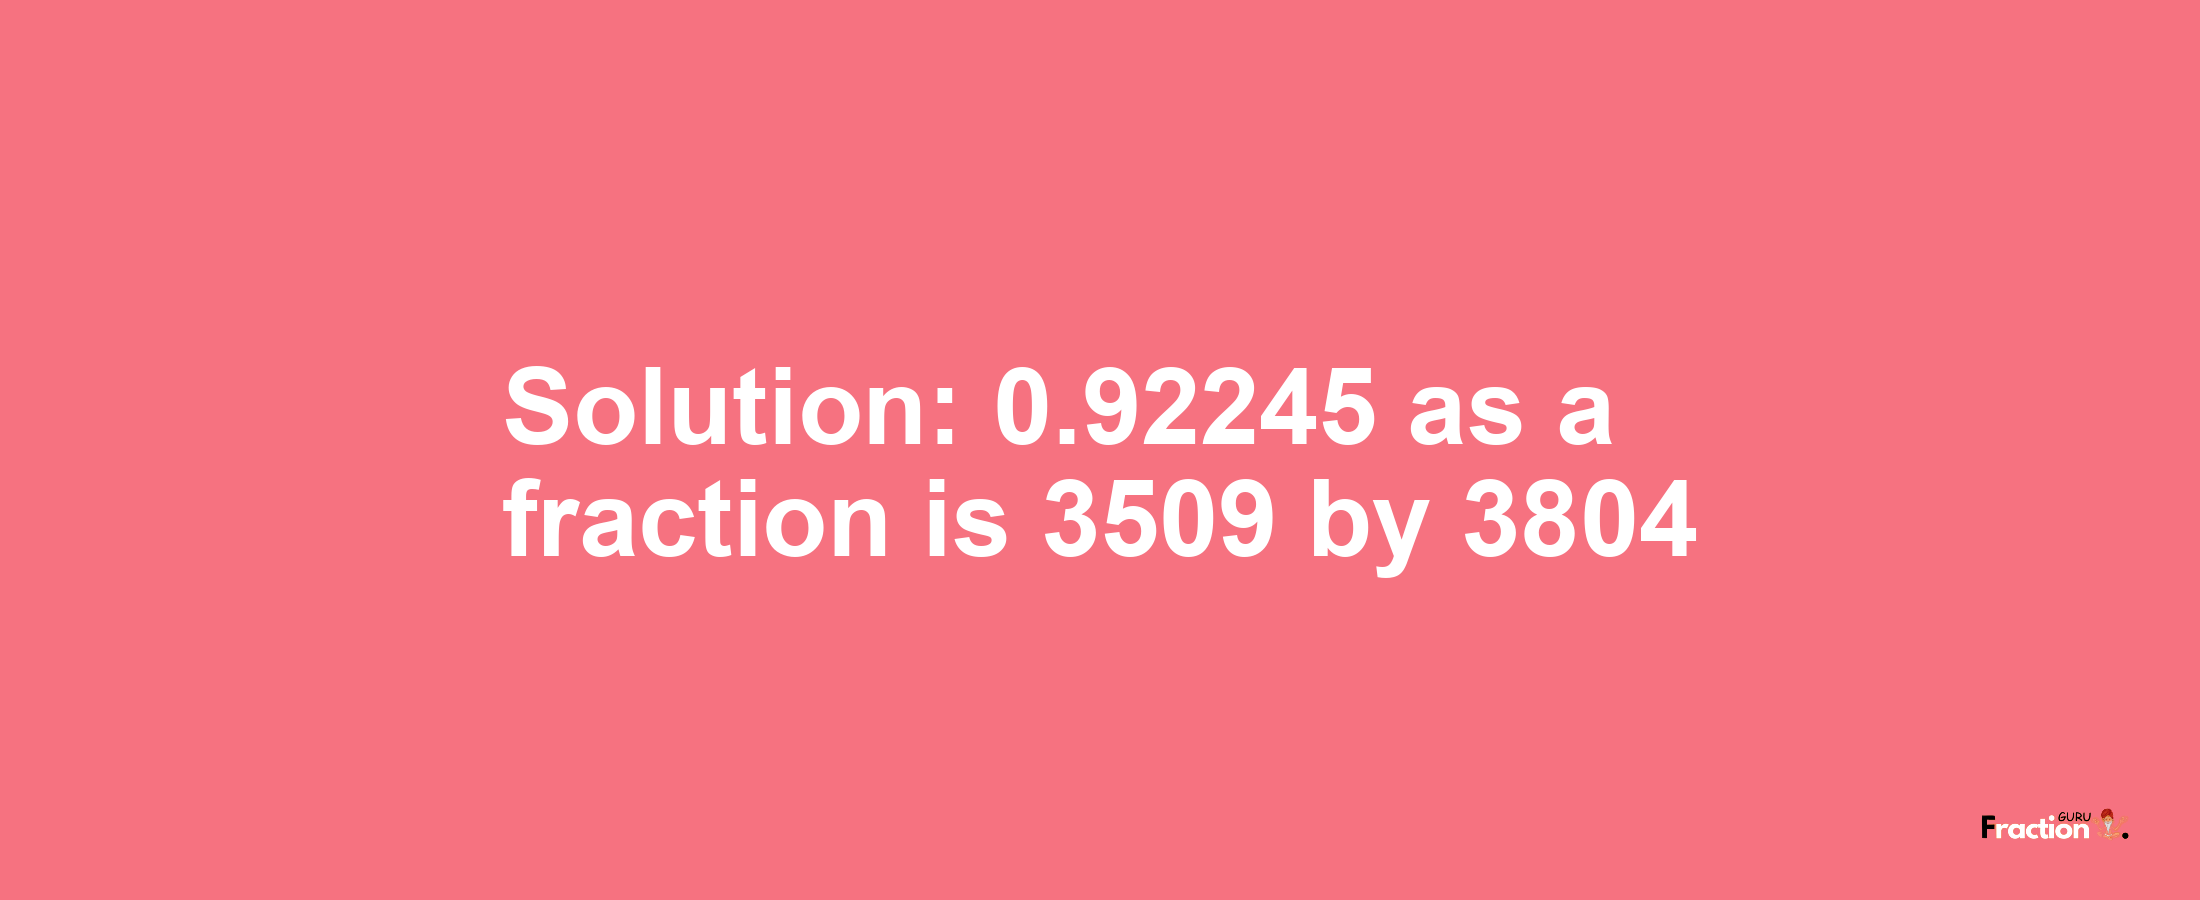 Solution:0.92245 as a fraction is 3509/3804